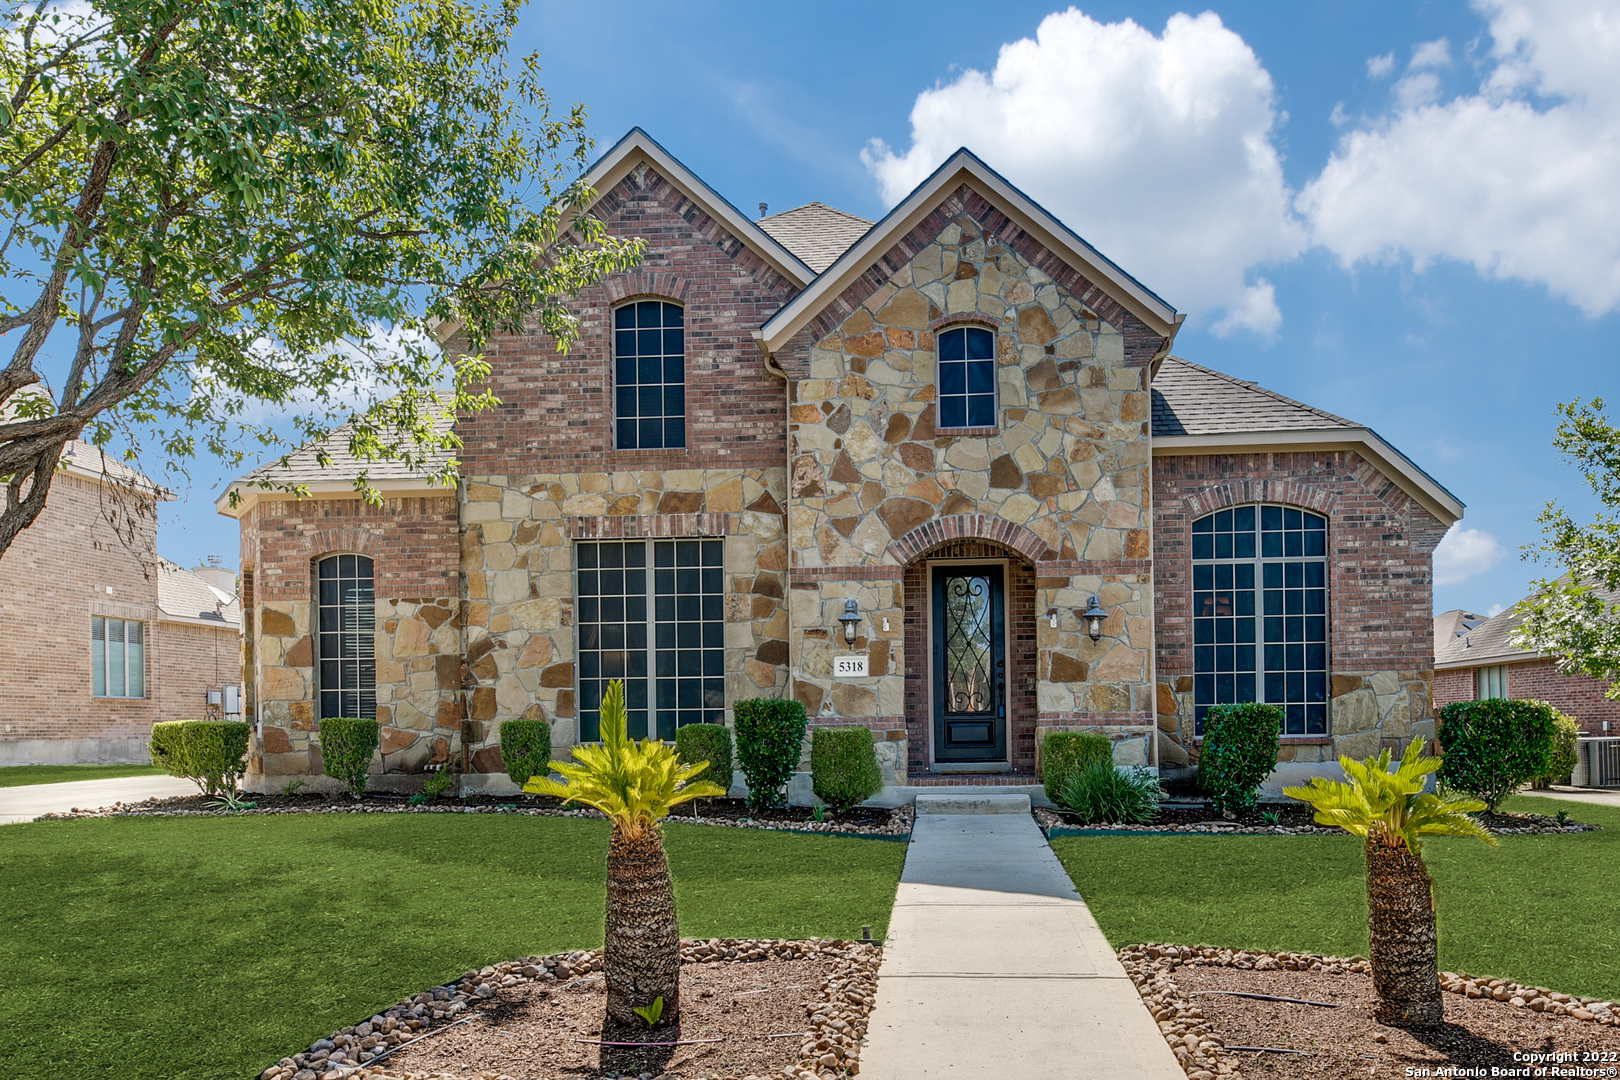 This gorgeous home is nestled in the prestigious subdivision of Alamo Ranch at the Summit. In the gated section, homeowners will appreciate the privacy and coveted access. Upon arrival, the stone and brick exterior creates unique curb appeal with delicate landscaping. Inside, soaring ceilings are highlighted by picture windows and natural wood flooring. The spacious living area offers a floor-to-ceiling stone fireplace, perfect for gathering with loved ones. The household chef will revel in the gourmet kitchen with an abundance of prep and storage space. Double ovens and gas cooking add convenience for culinary adventures. The breakfast nook and dining room allow for various opportunities while entertaining. The office offers French doors for added privacy. Retreat to the roomy primary suite with en suite. A secondary bedroom is suitable for a guest suite. Upstairs, a study space, media room, and three secondary bedrooms remain. The sunroom allows for enjoying views of the outdoors year-round. Send the summers in the glistening pool with a spa. In addition to all the home has to offer, a three-car garage is great for parking or a partial gym! Come see this home today before it's too late!